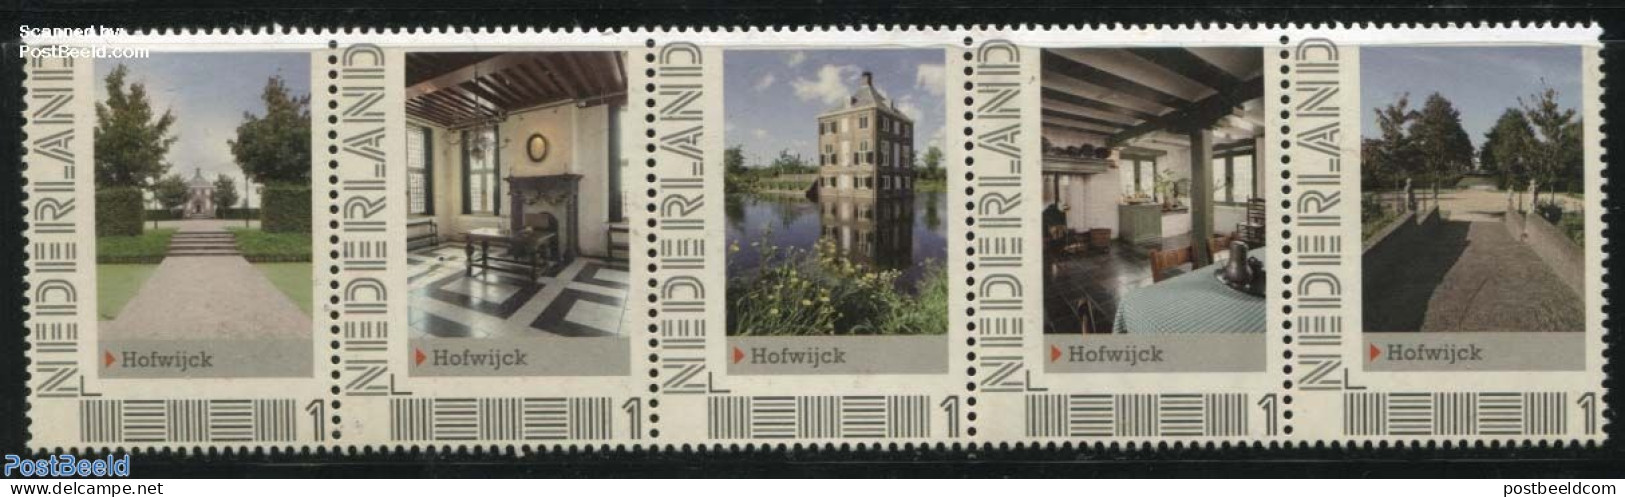 Netherlands - Personal Stamps TNT/PNL 2012 Hofwijck 5V [::::], Mint NH, Nature - Trees & Forests - Art - Castles & For.. - Rotary, Club Leones